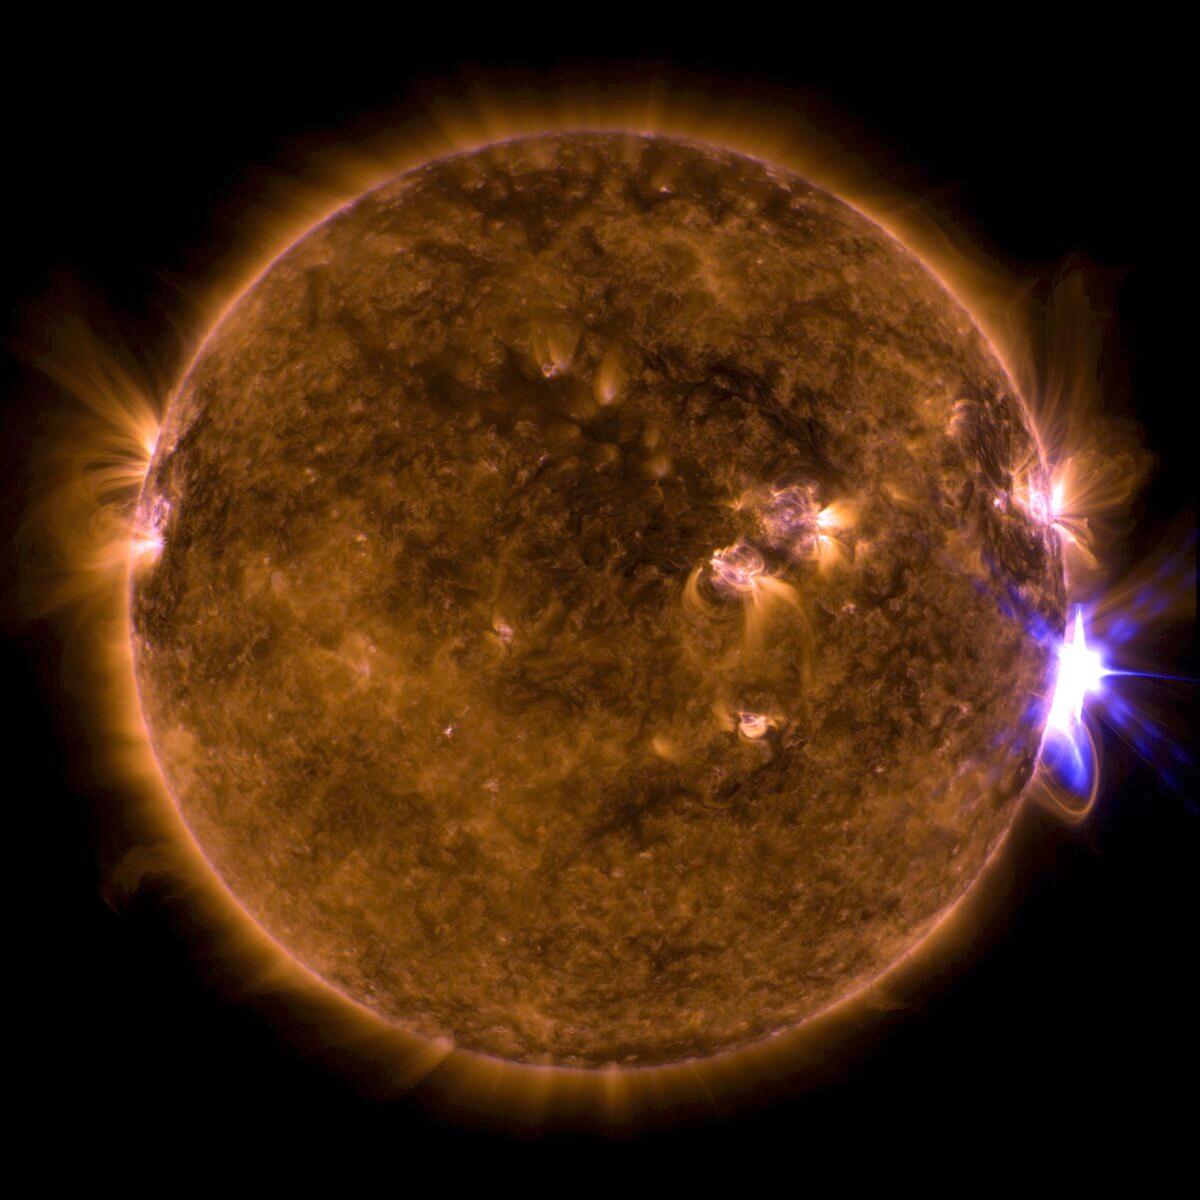 NASA’s Solar Dynamics Observatory captured this image of a solar flare, a powerful burst of radiation, as seen in the bright flash on the right side, on Sept. 10, 2017. The harmful radiation cannot pass through Earth's atmosphere to physically affect humans on the ground, but when intense enough, it can disturb the atmosphere in the layer where GPS and communications signals travel. (NASA/GSFC/Solar Dynamics Observatory)